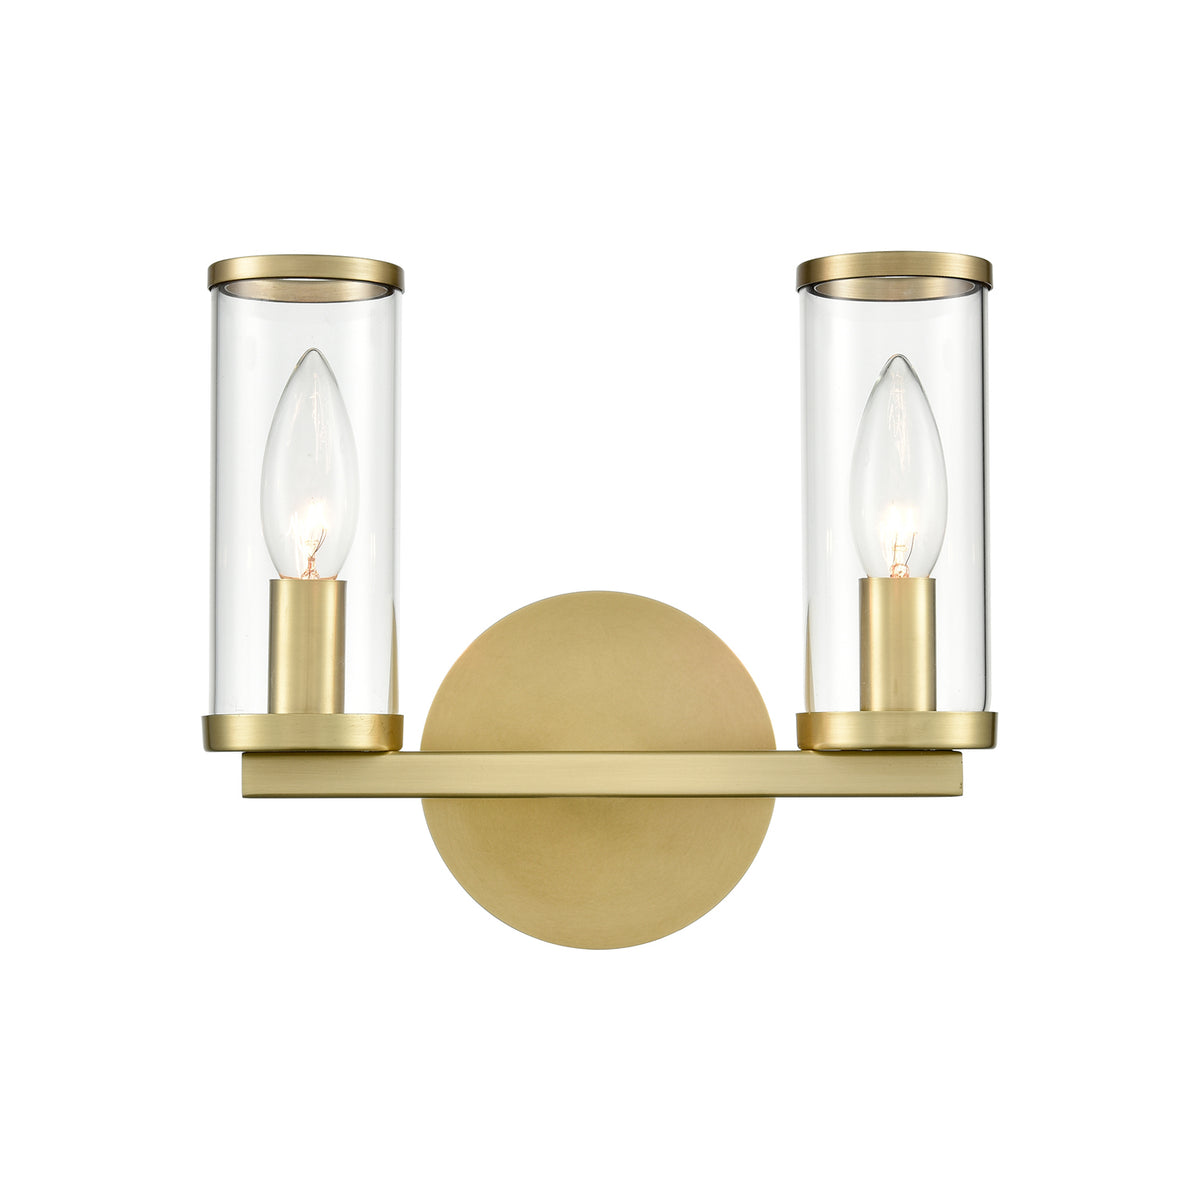 Alora - WV309022NBCG - Two Light Bathroom Fixture - Revolve - Clear Glass/Natural Brass